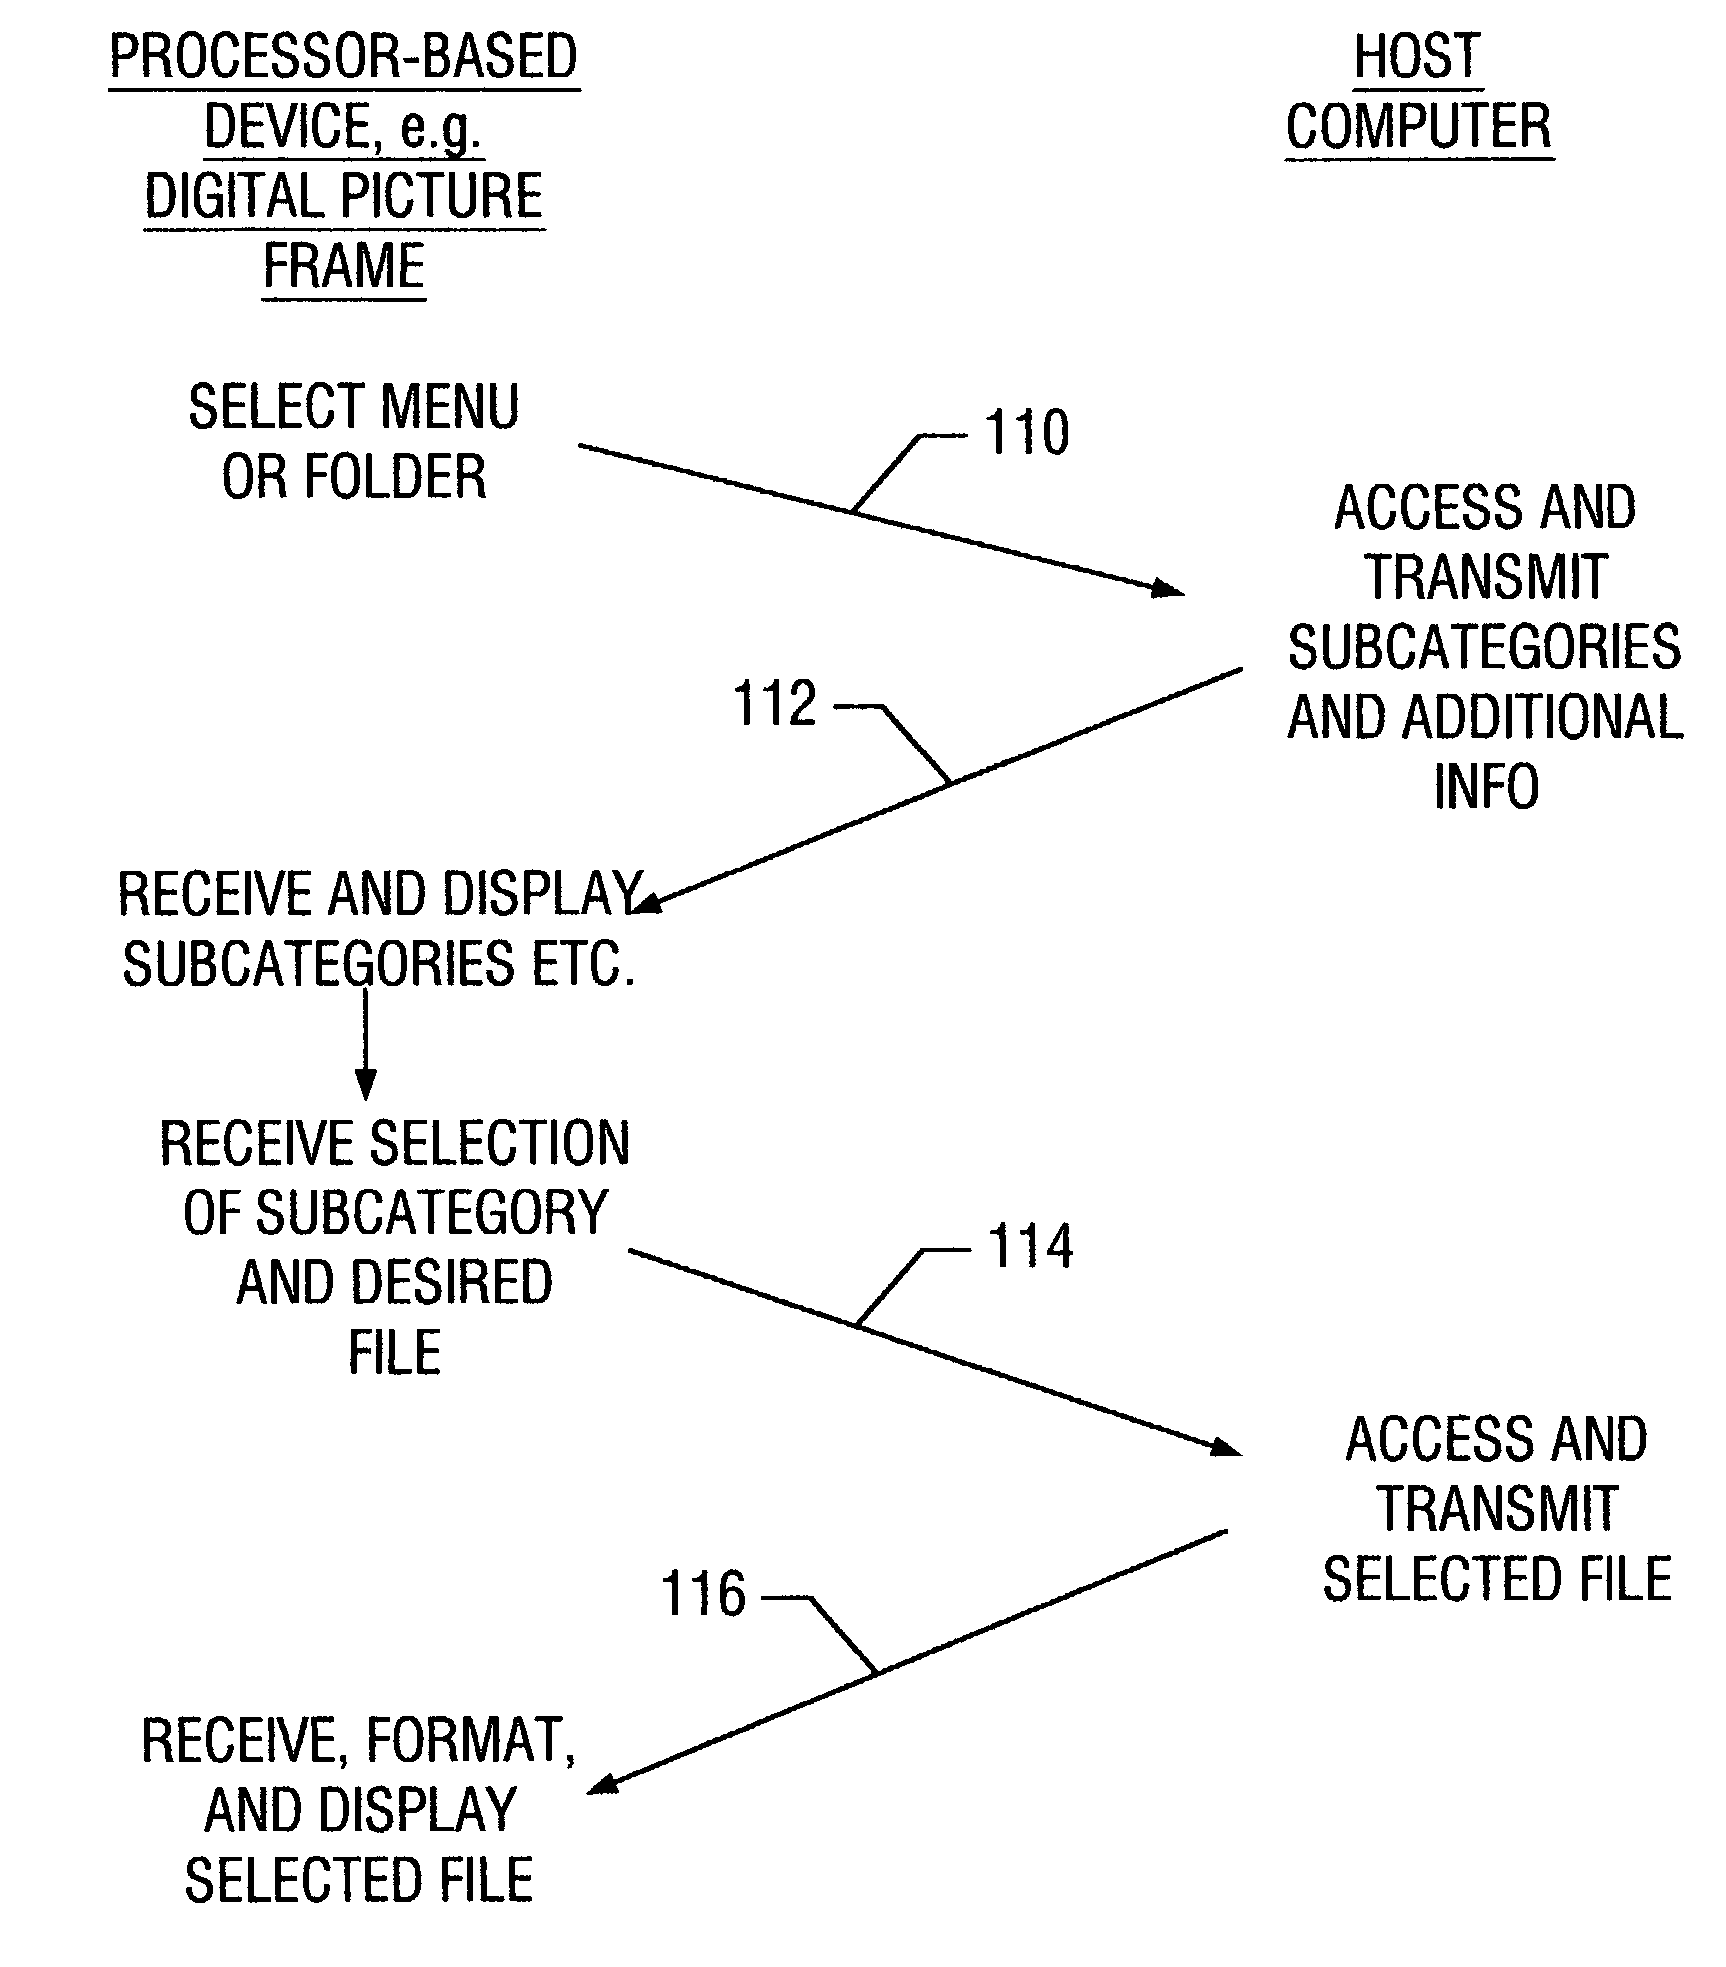 Apparatus and methods to exchange menu information among processor-based devices